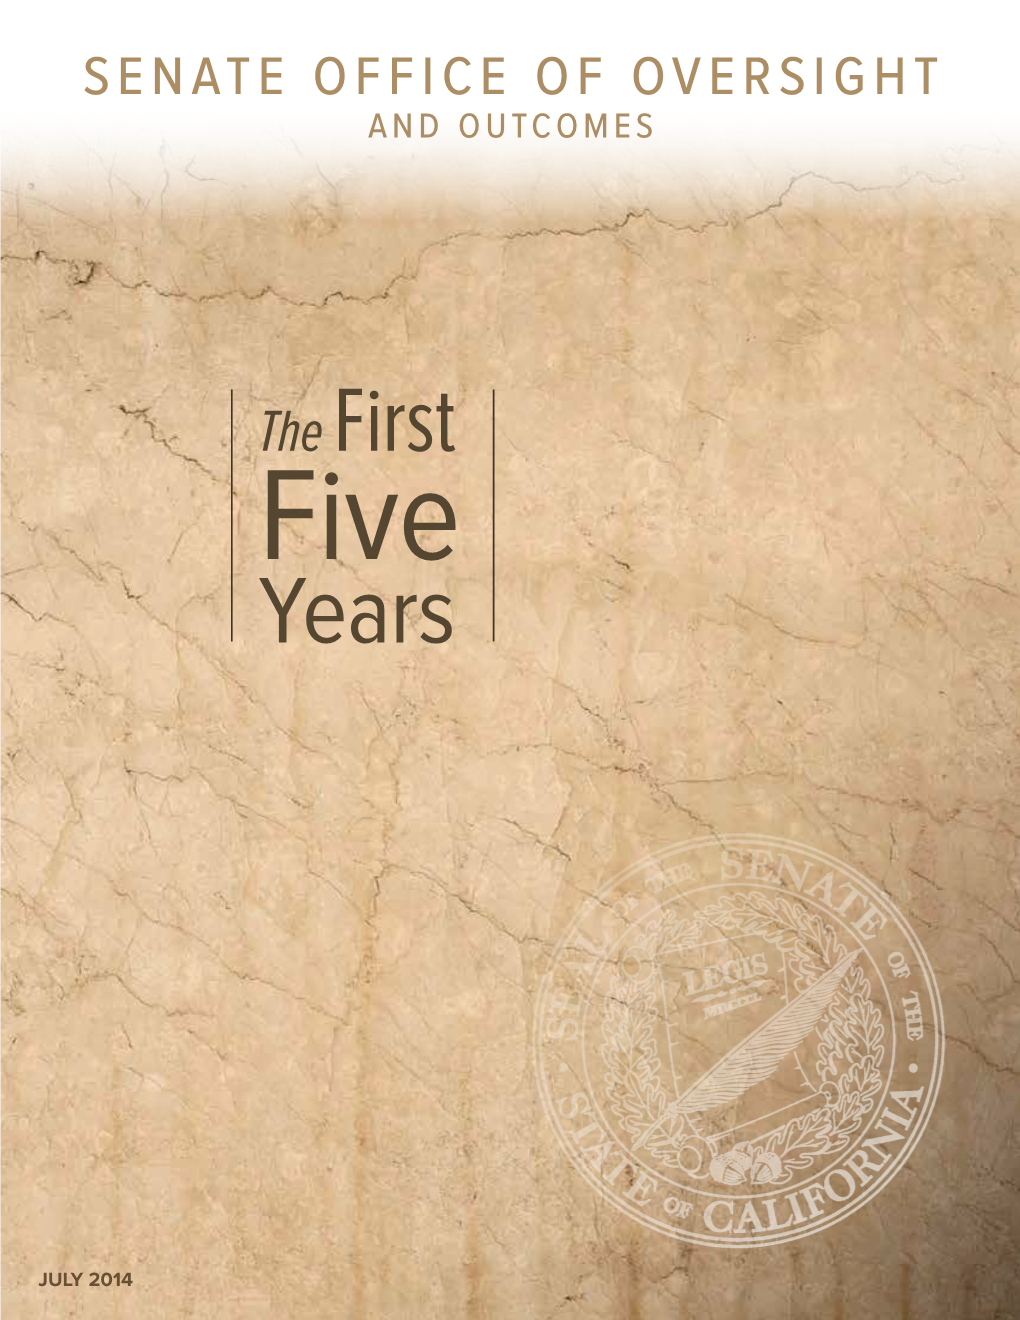 OVERVIEW REPORT: the First Five Years